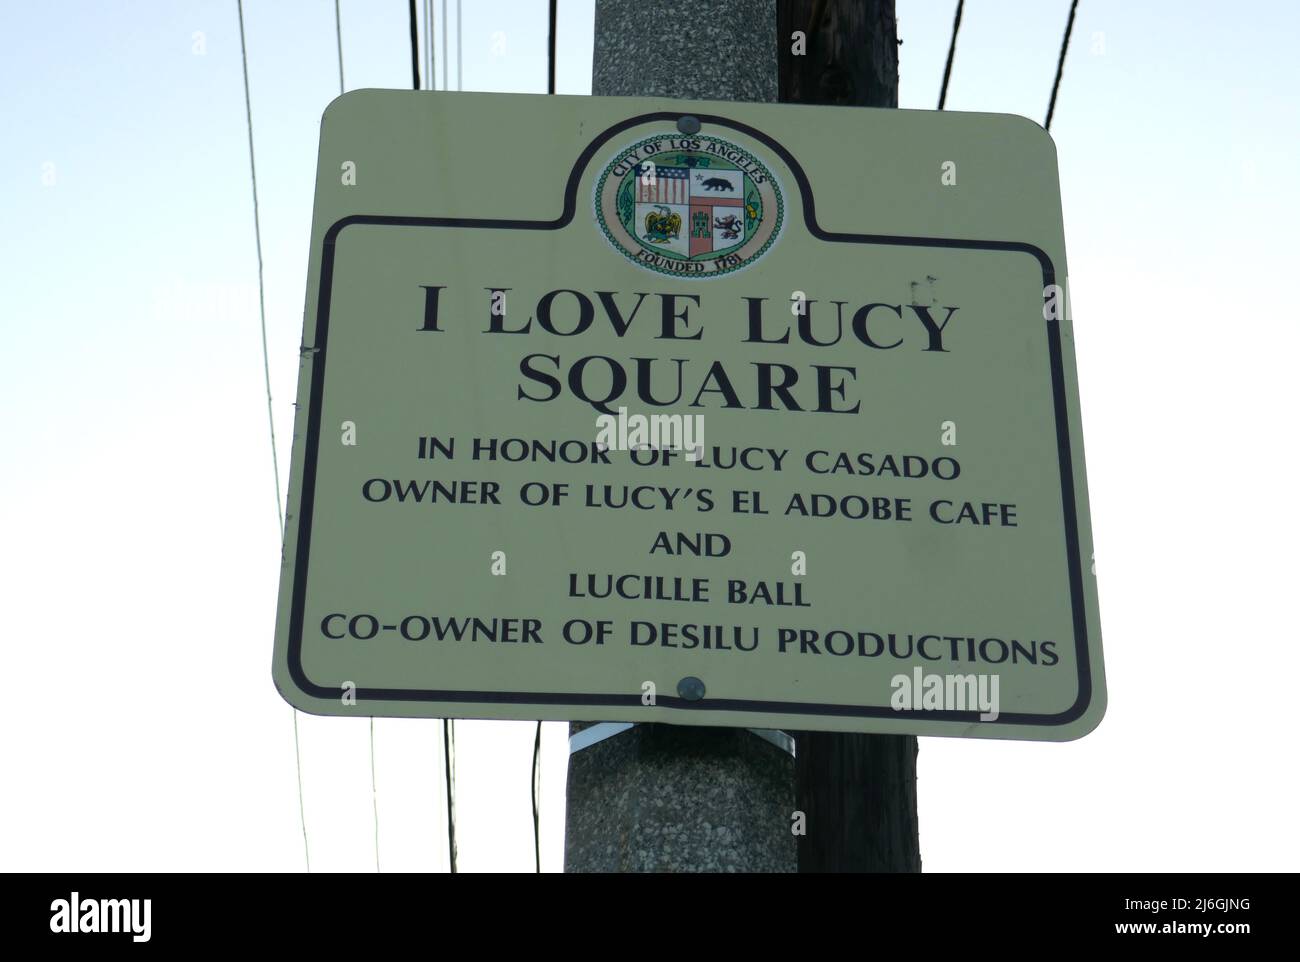 Los Angeles, California, USA 20th April 2022 A general view of atmosphere of I Love Lucy Square Signl with Lucille Ball on April 20, 2022 in Los Angeles, California, USA. Photo by Barry King/Alamy Stock Photo Stock Photo